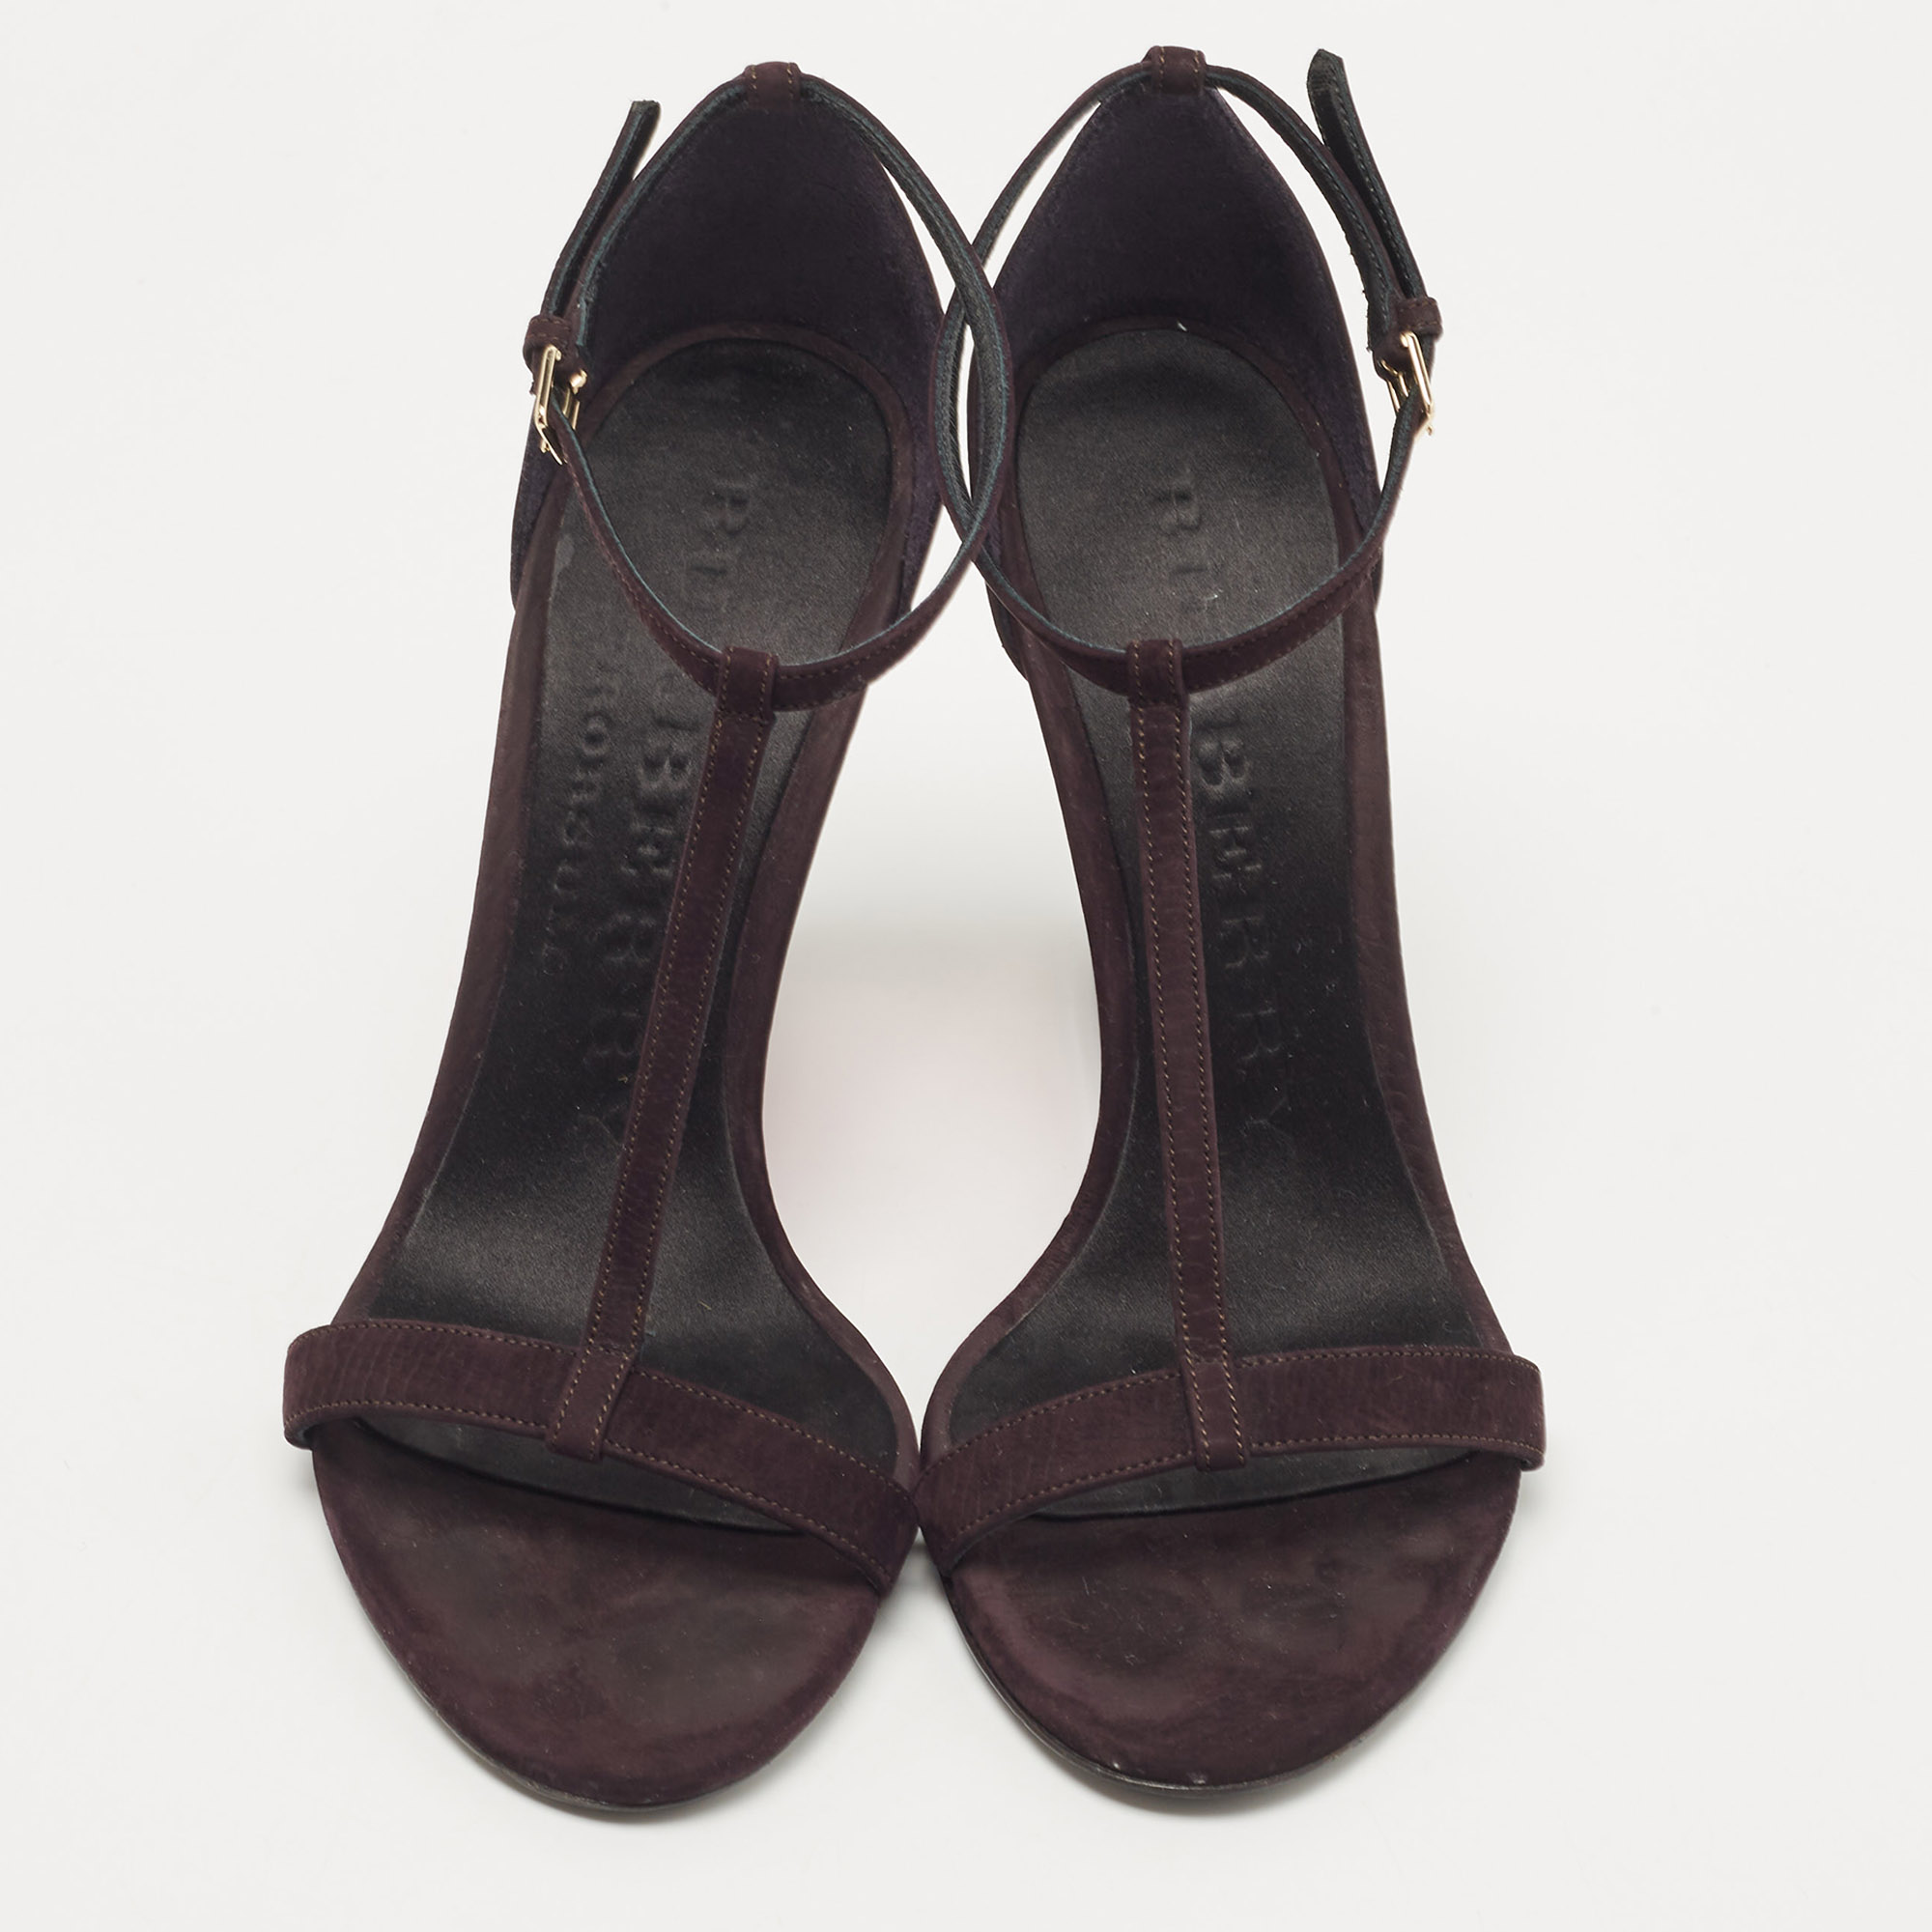 Burberry Plum Suede T Strap Wedge Sandals Size  37